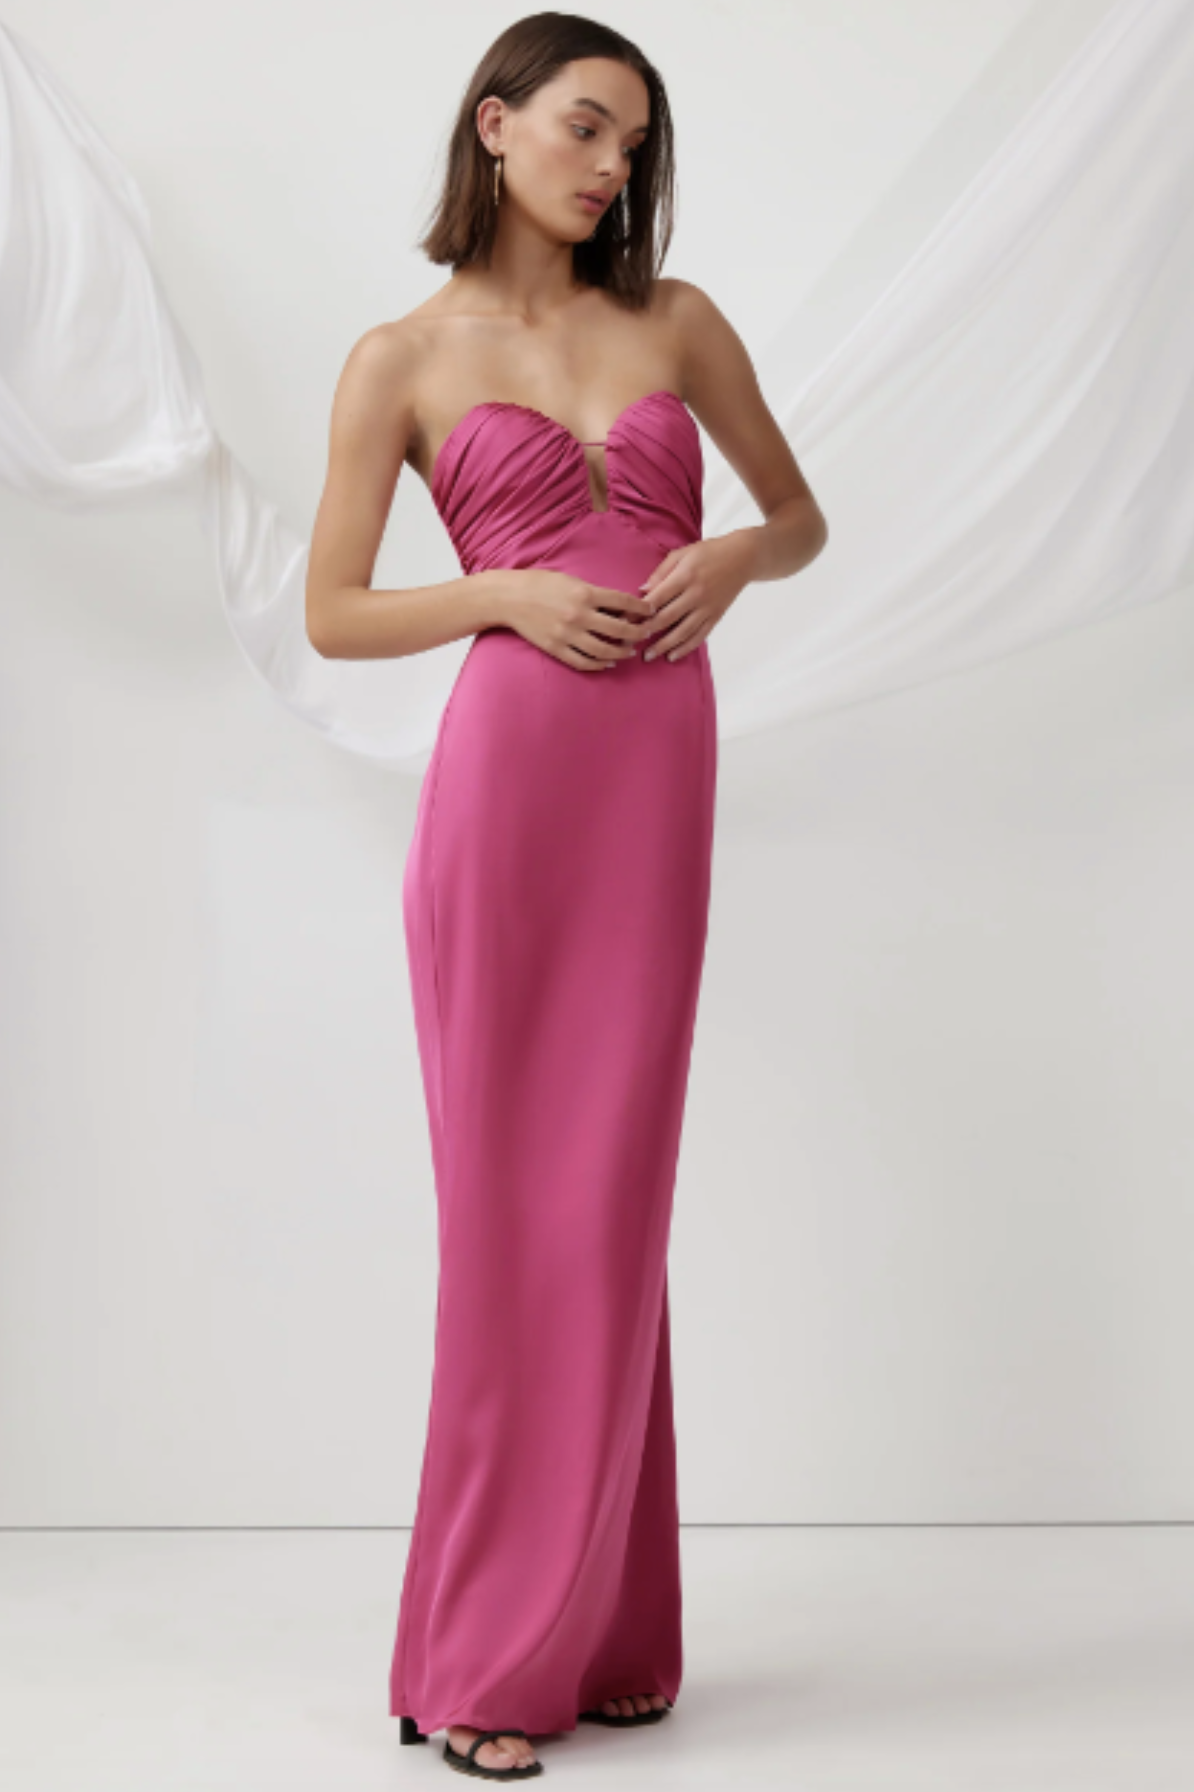 Vespa Gown in Magenta by Lexi - RENTAL